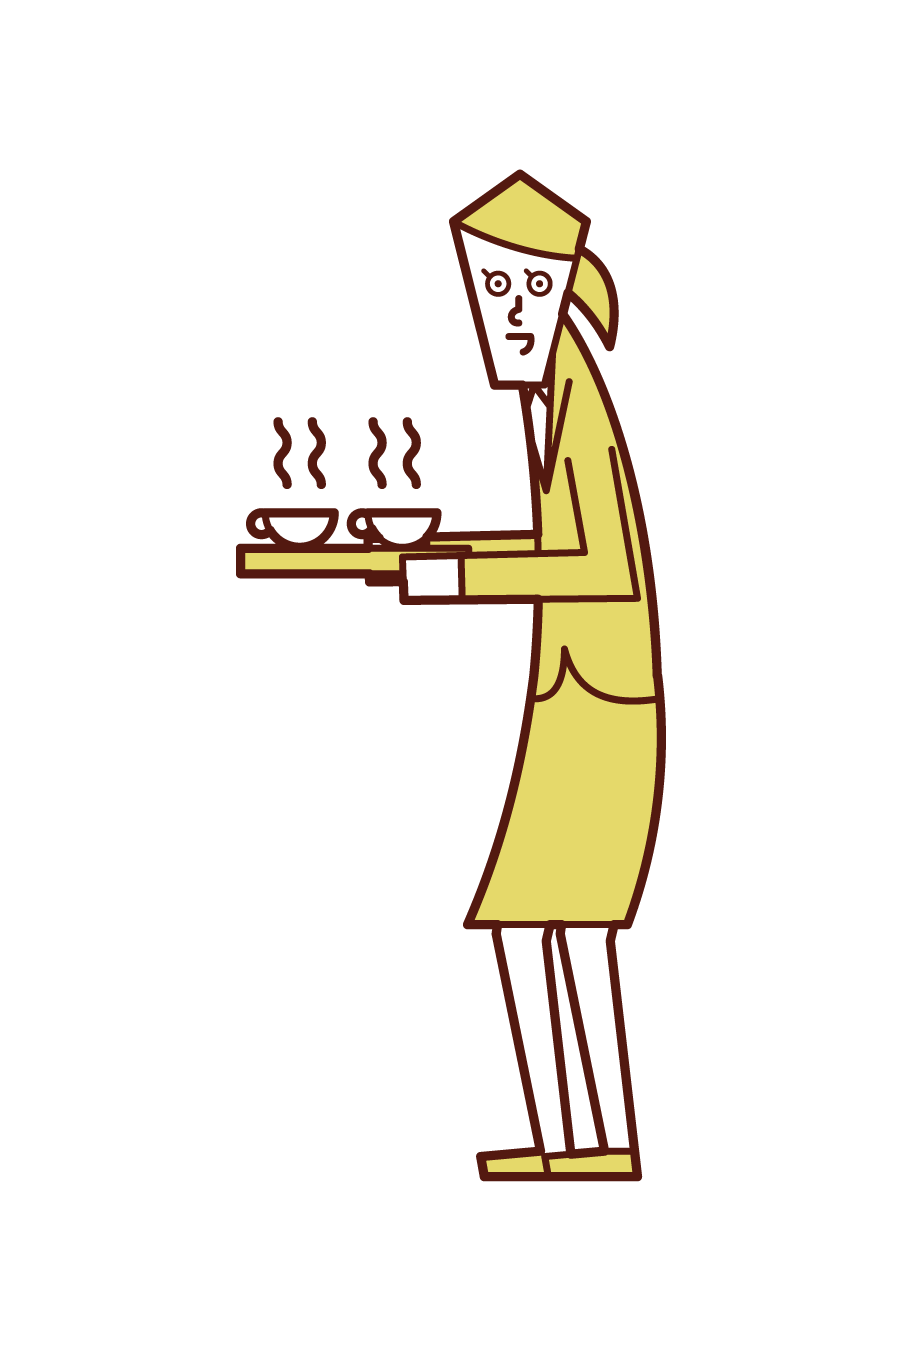 Illustration of a person (woman) who serves tea or coffee